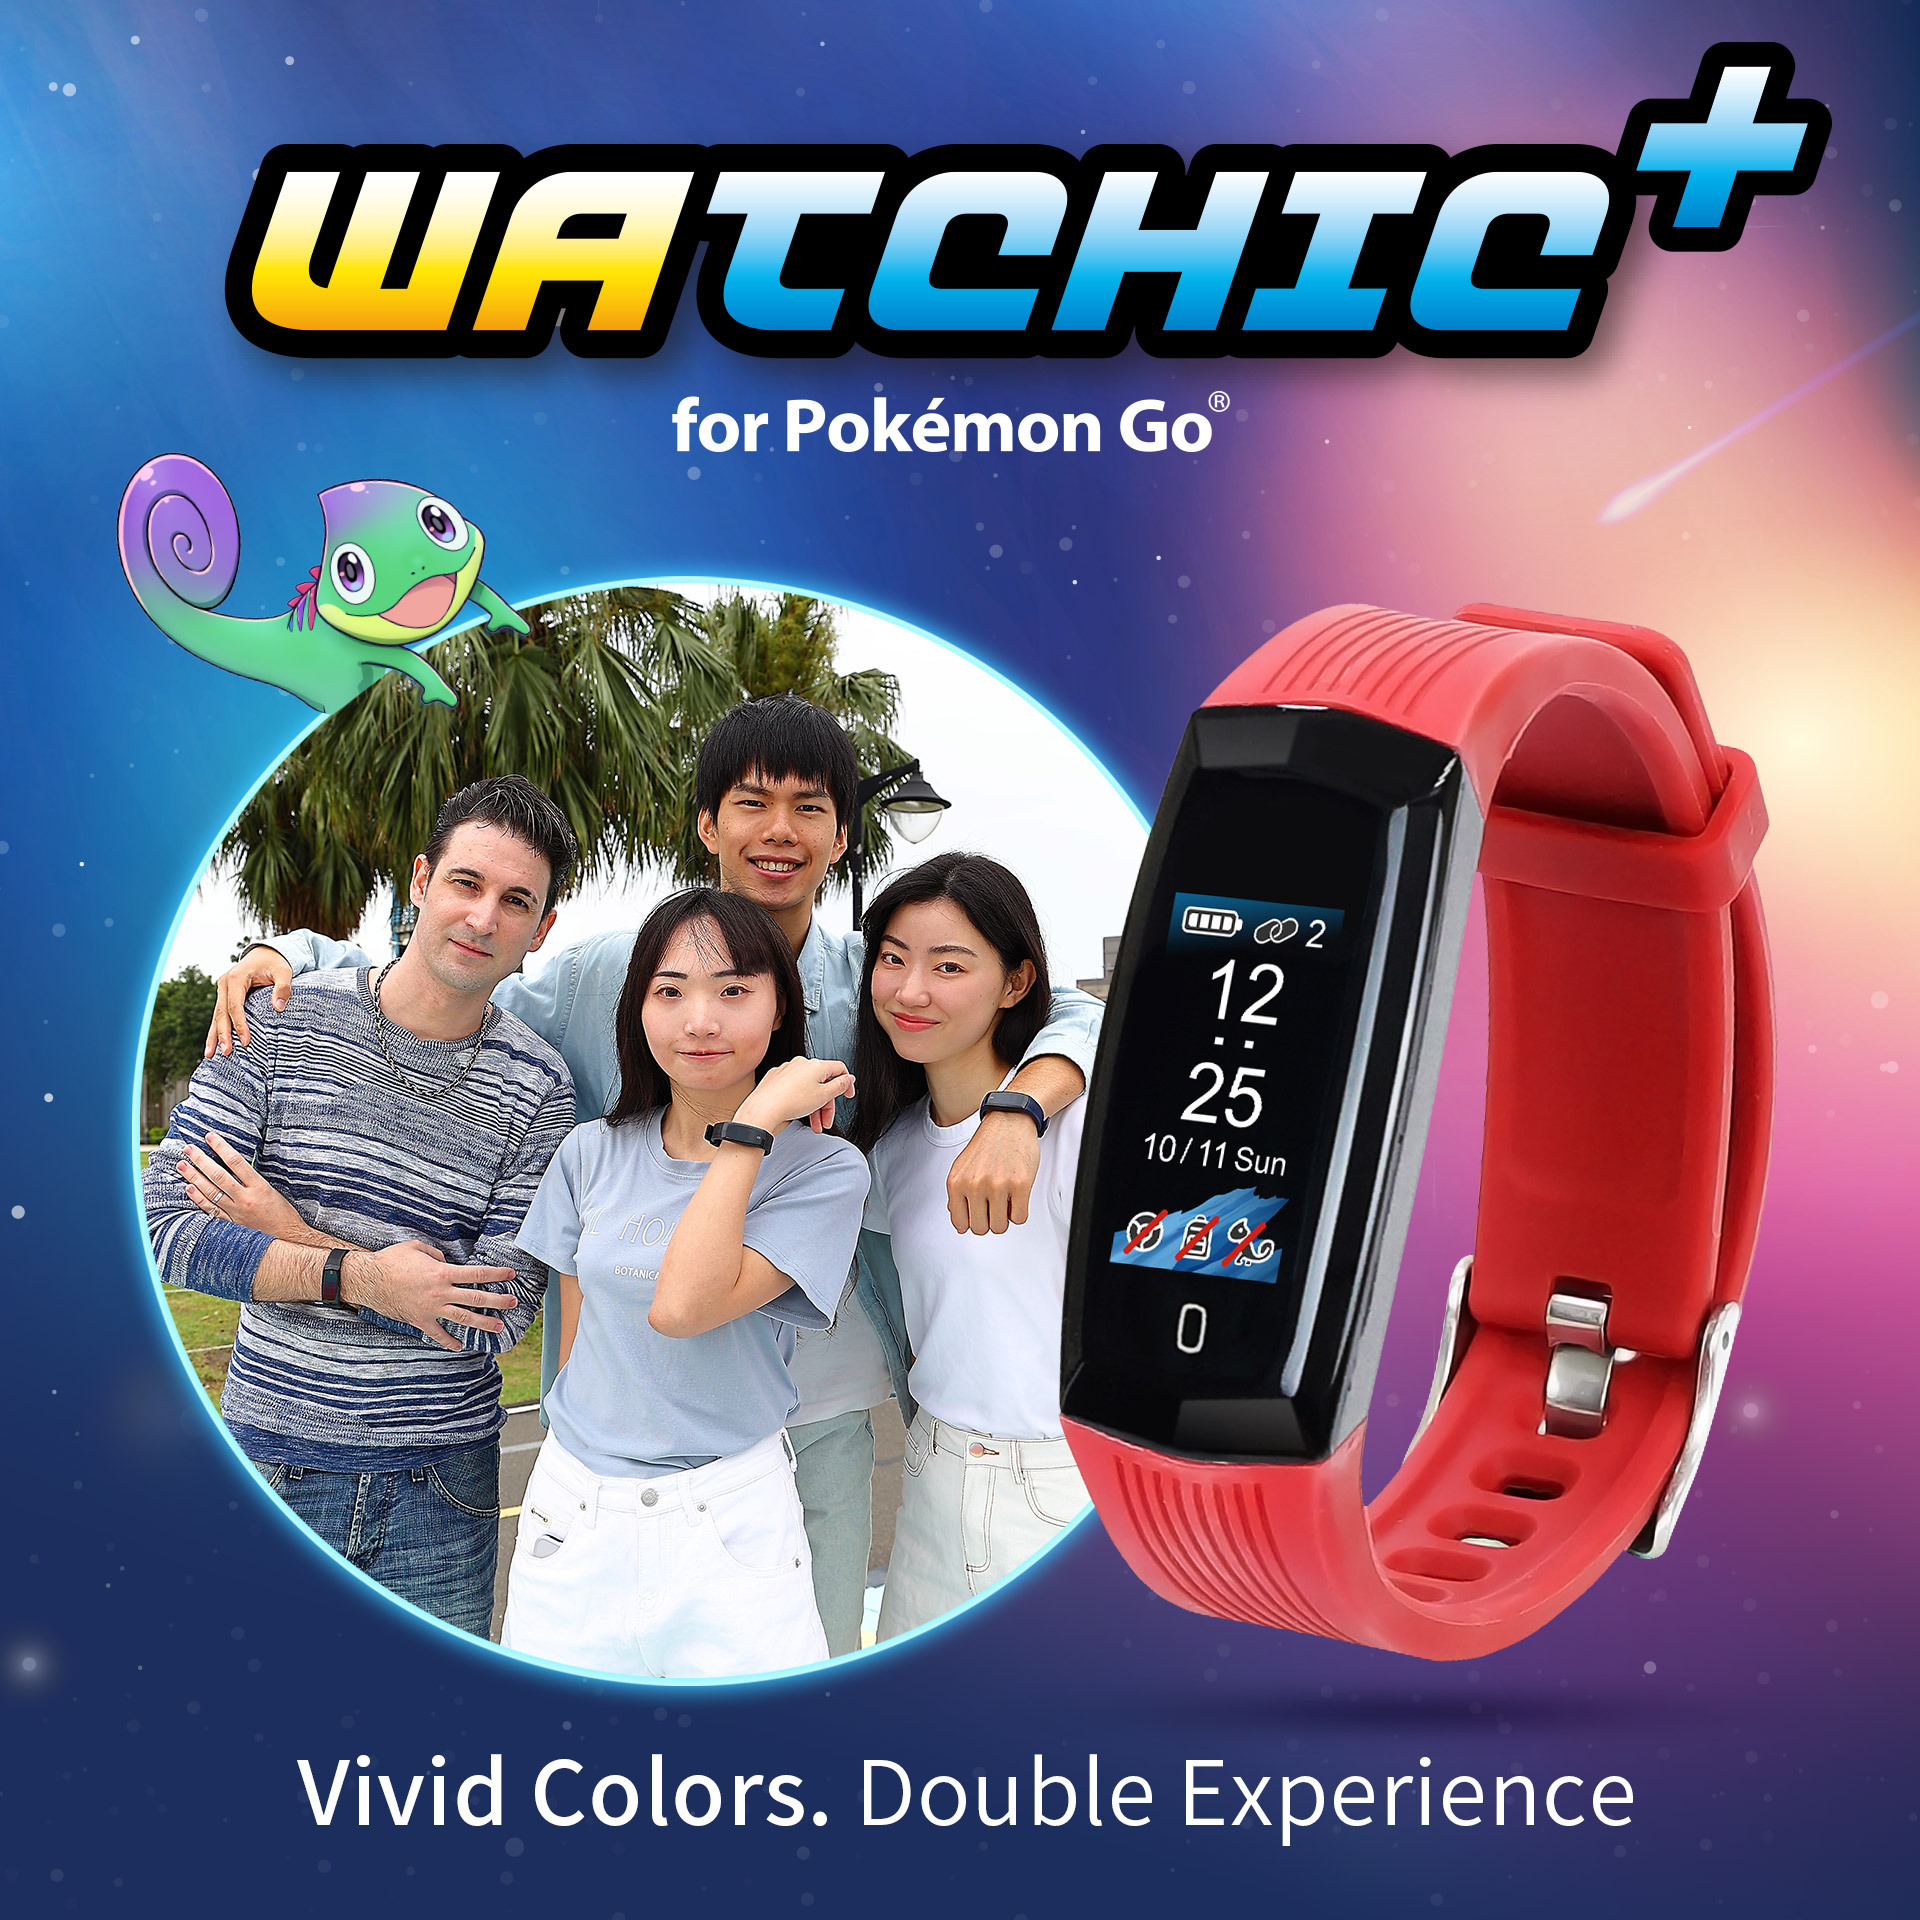 Amazon.com: Go-tcha Evolve LED-Touch Wristband Watch for Pokemon Go with  Auto Catch and Auto Spin - Black/Red : Toys & Games